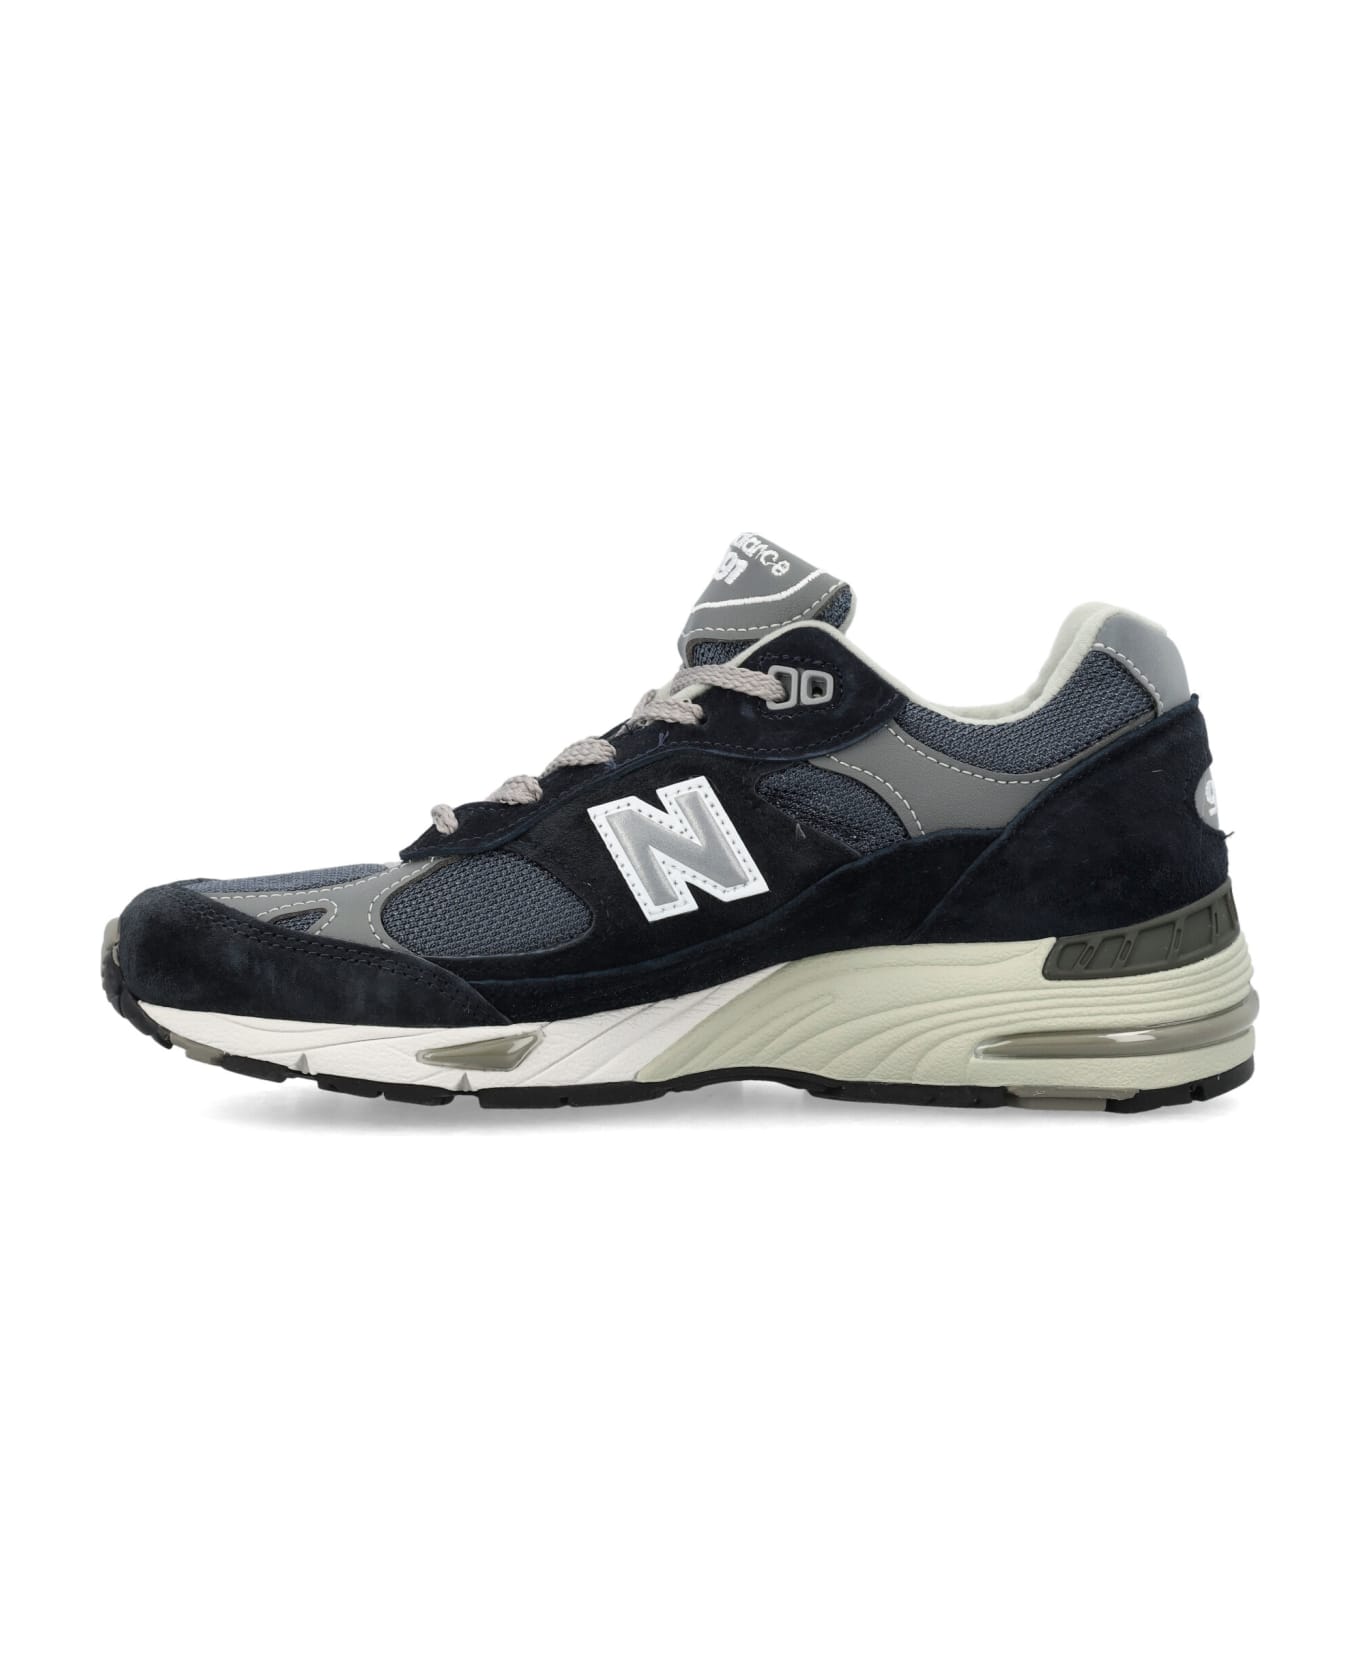 New Balance Made In Uk 991v1 Woman's Sneakers - NAVY スニーカー